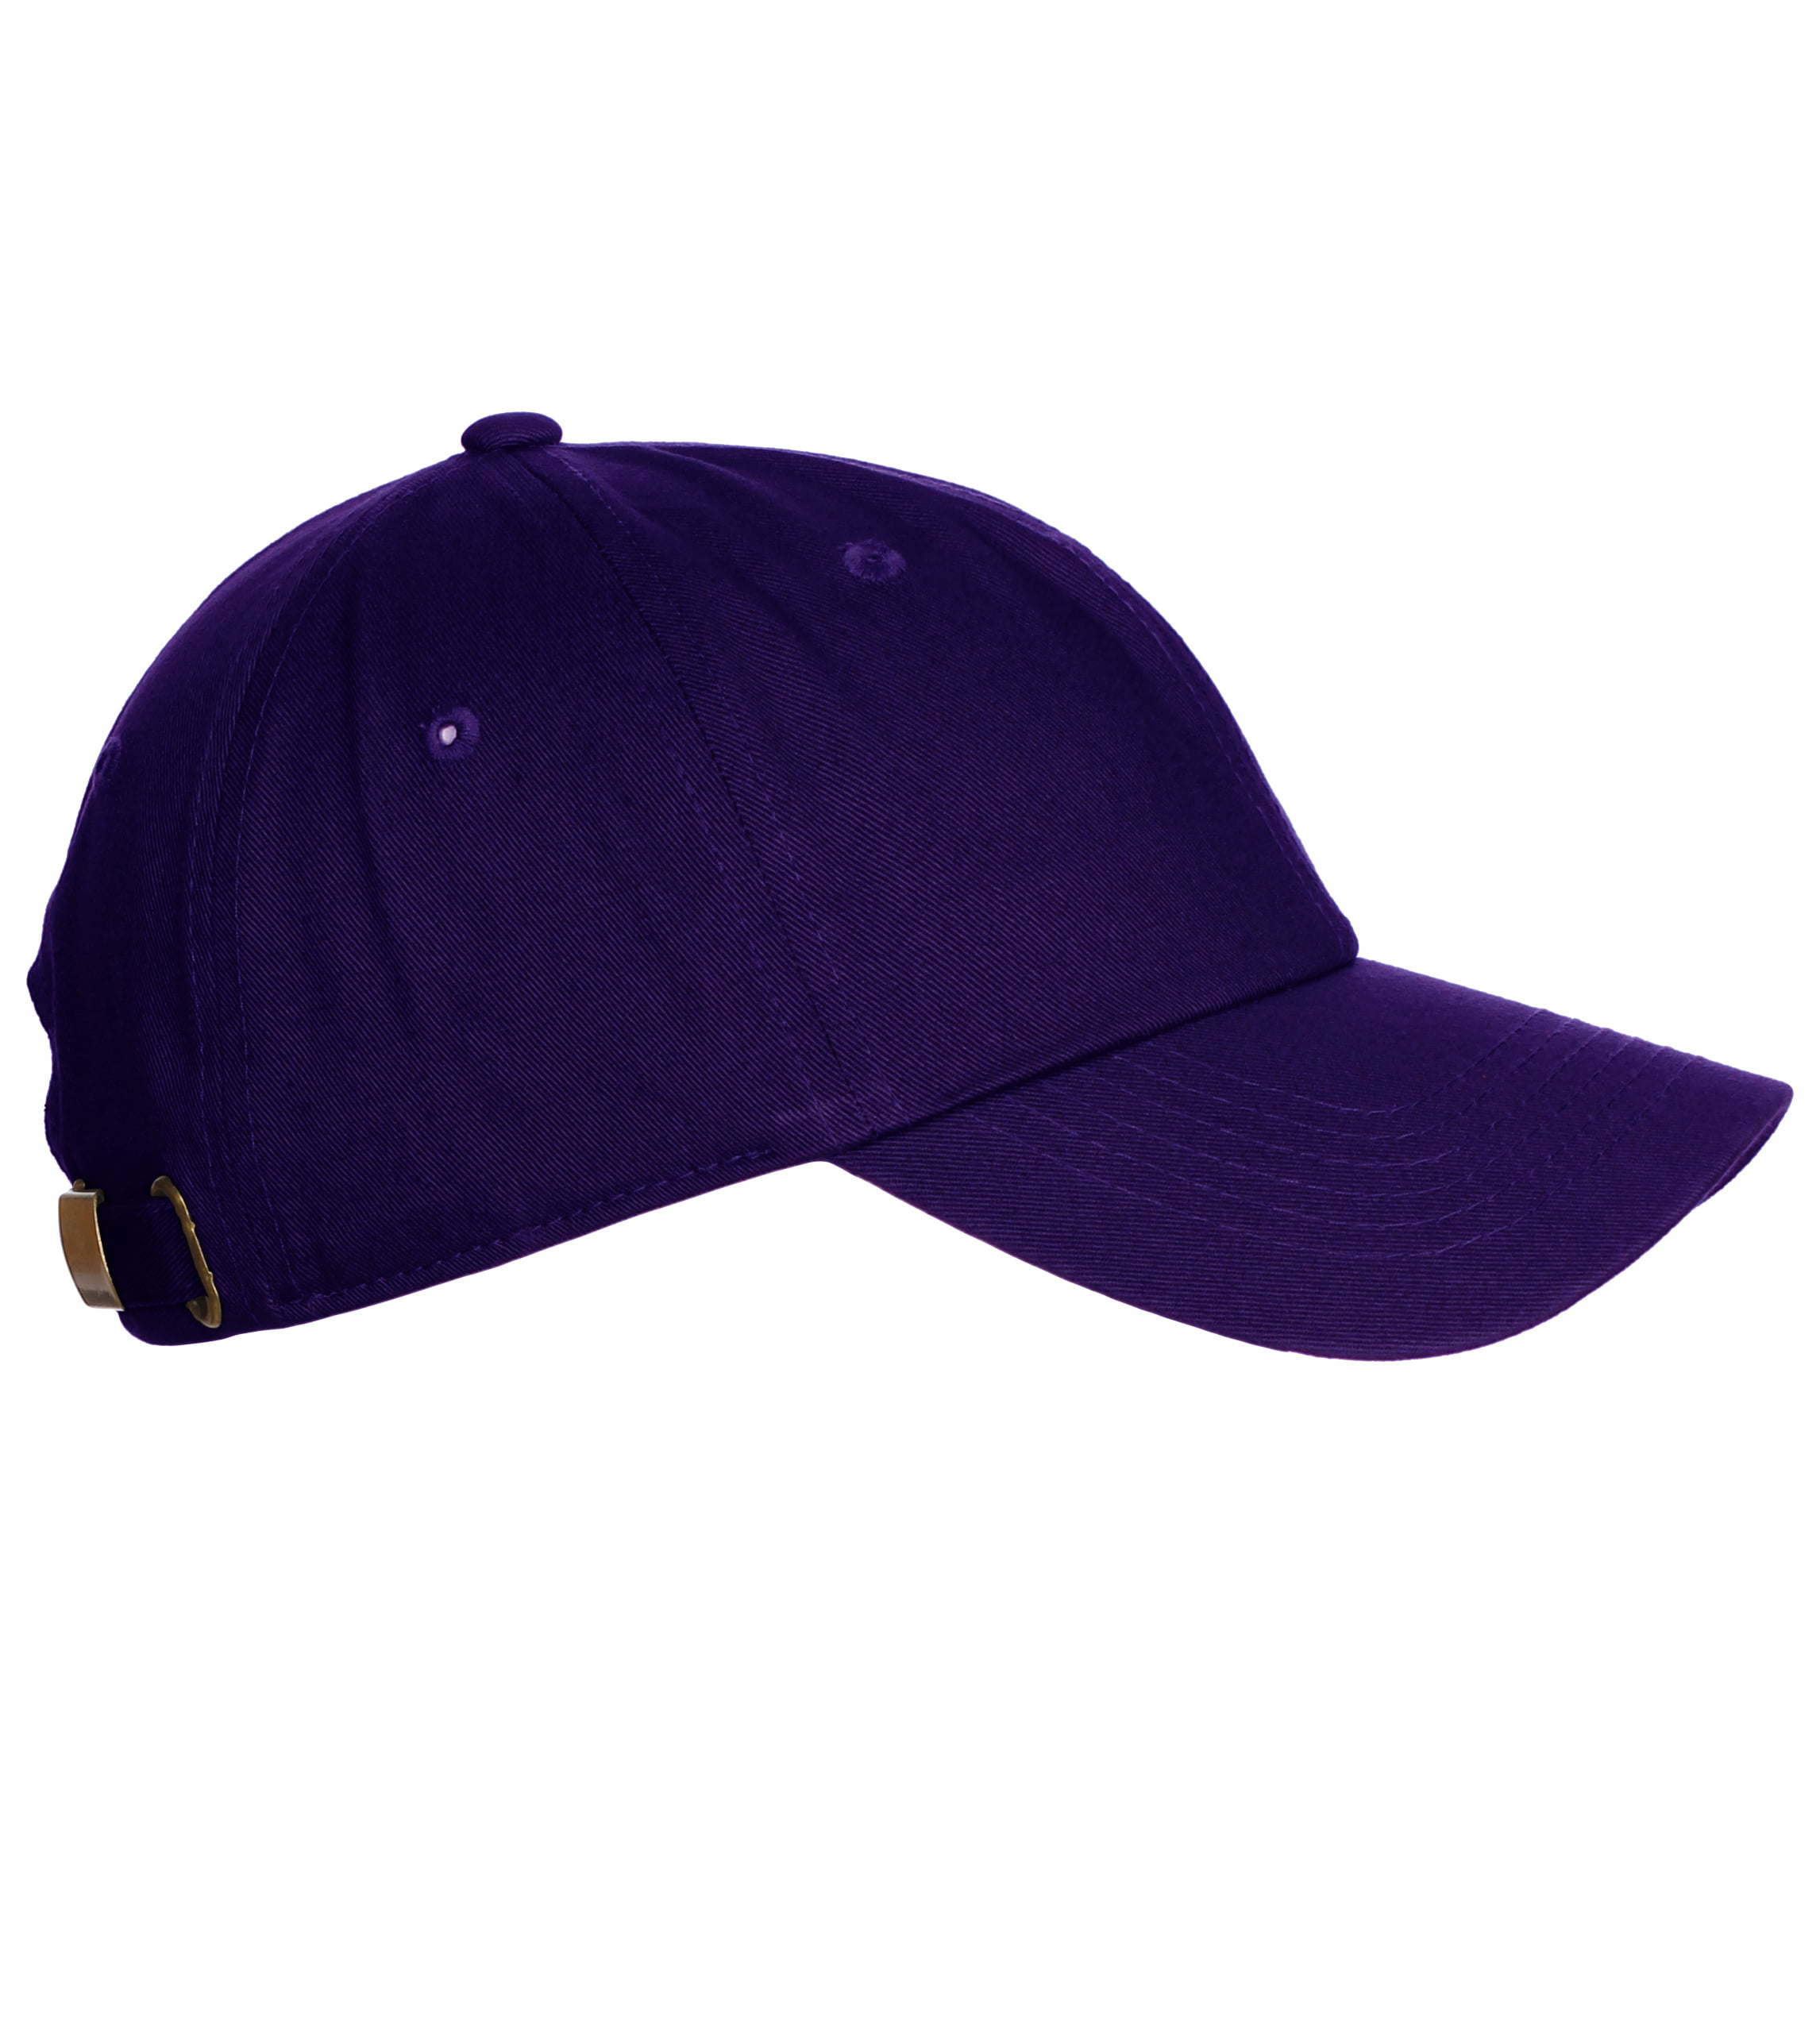 Customized Letter Intial Baseball Hat Cap to Letter White Colors, A M Purple Team Z Gold